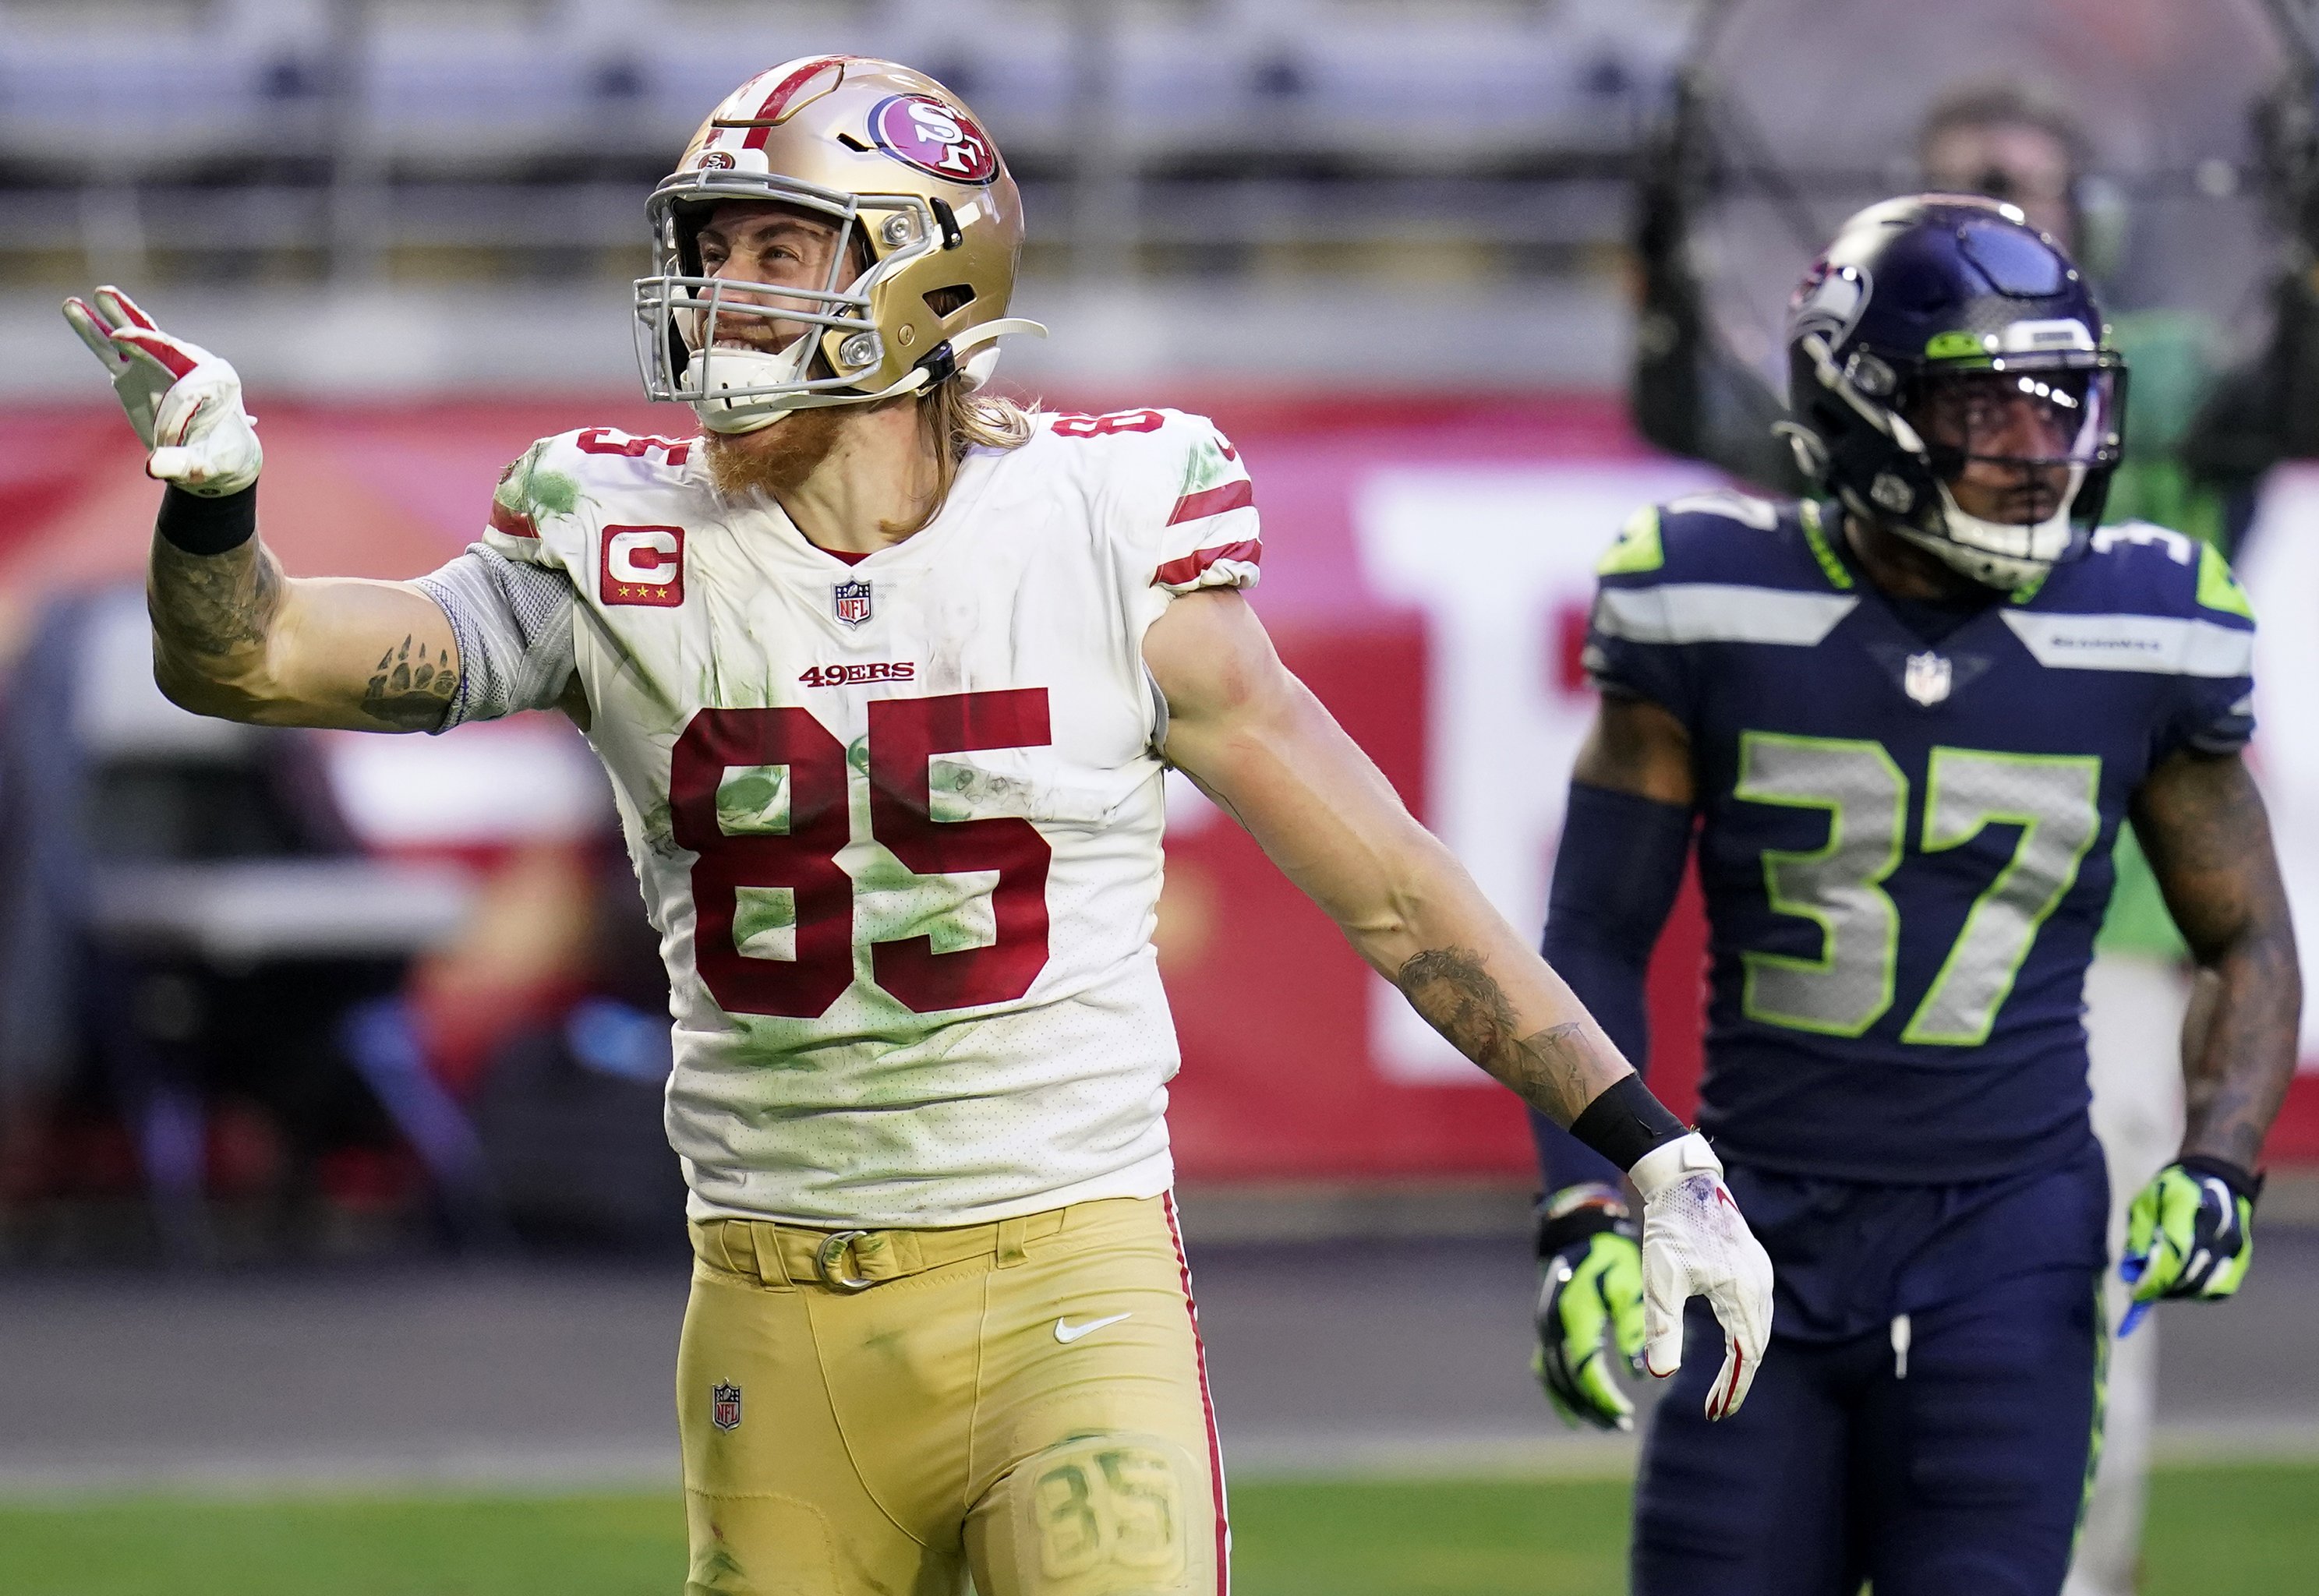 49ers news: ESPN ranks Niners offensive weapons 18th entering 2020